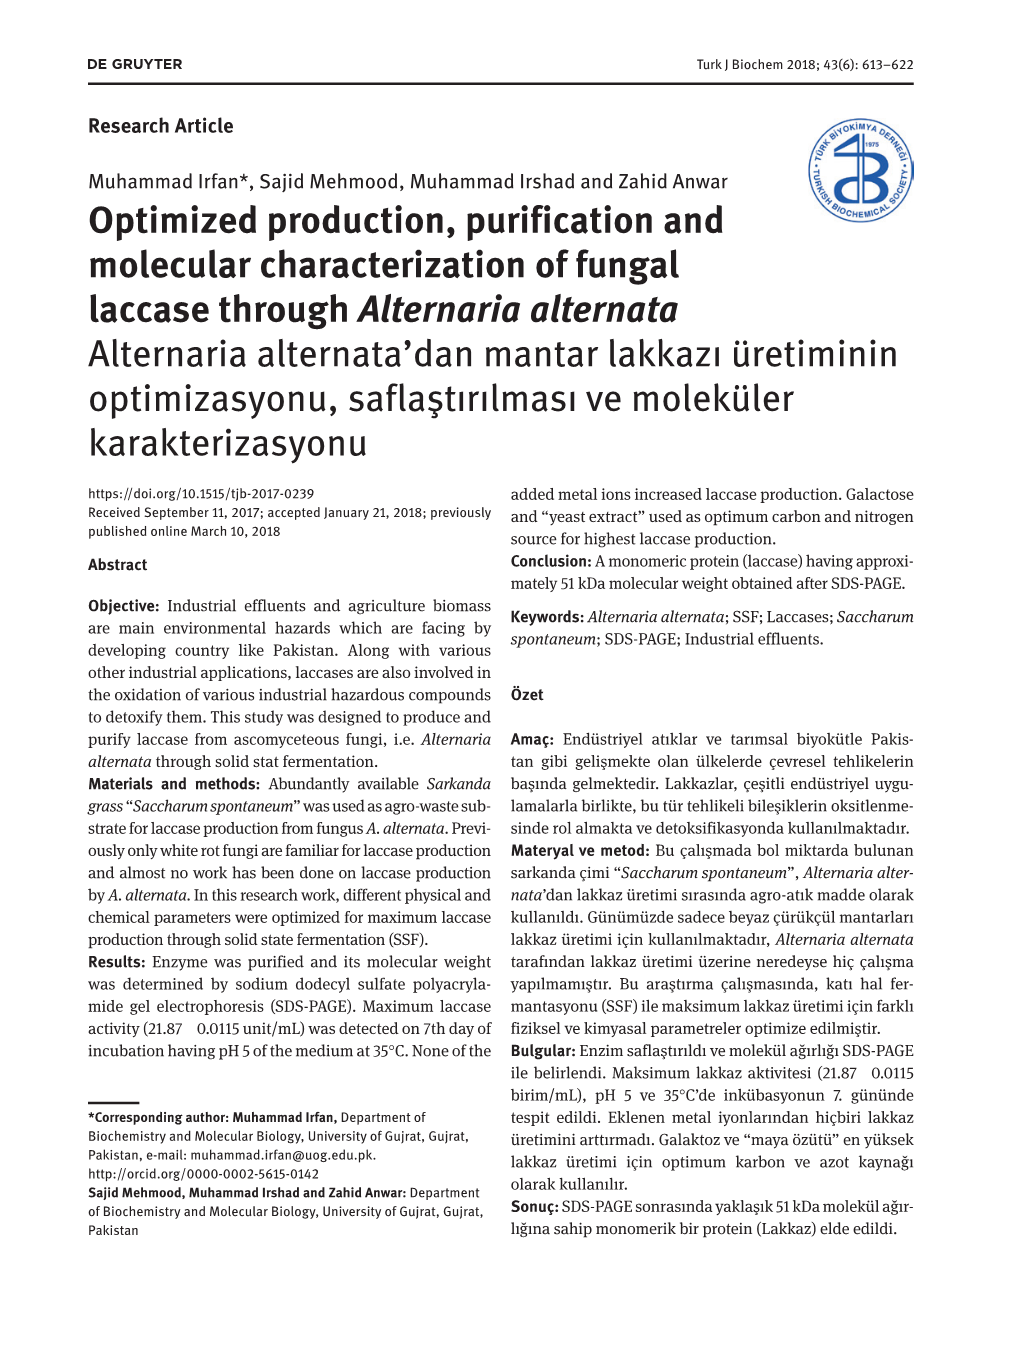 Optimized Production, Purification and Molecular Characterization of Fungal